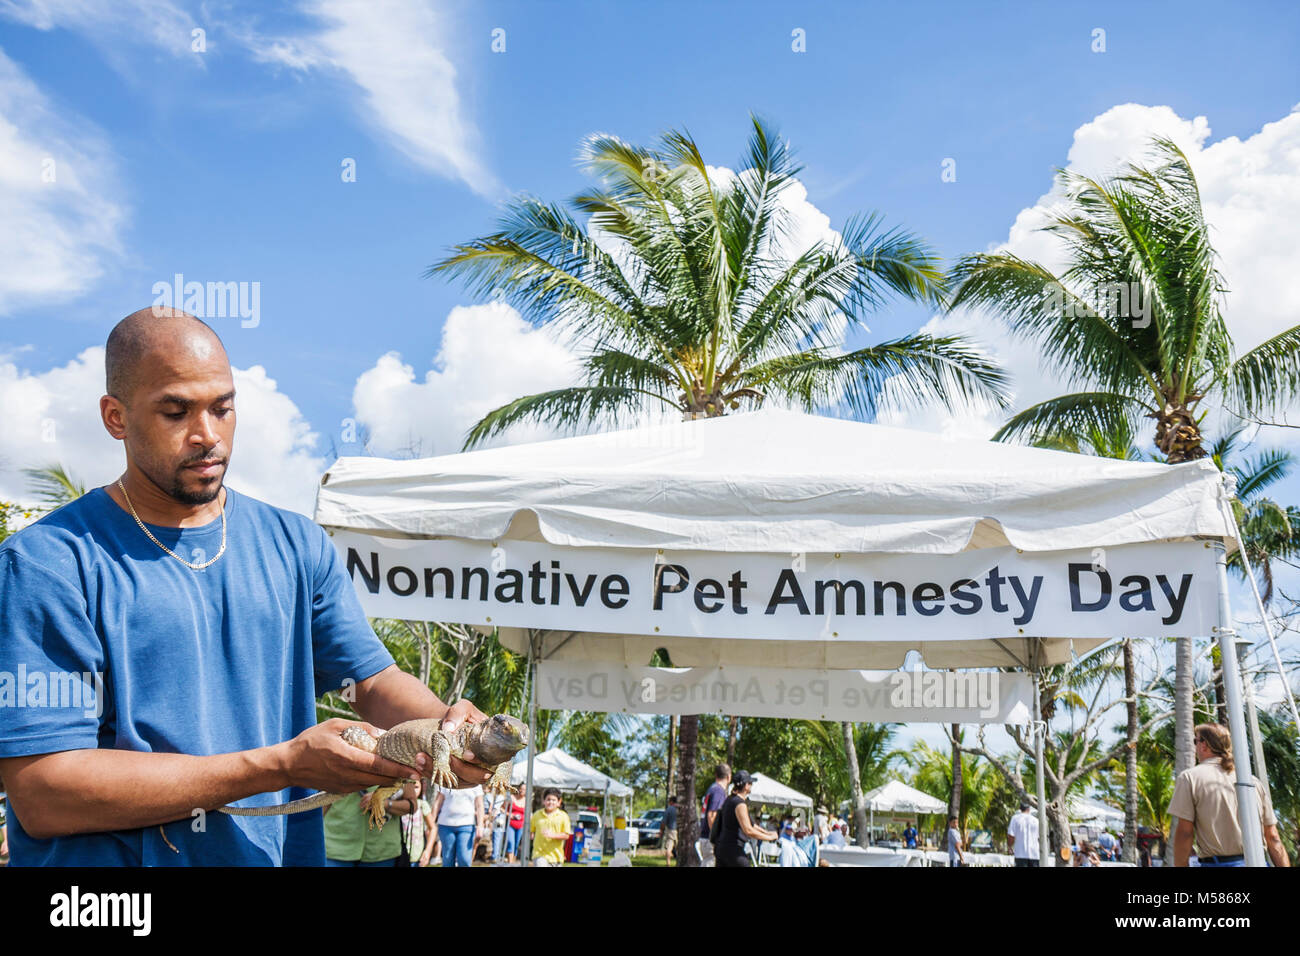 Miami Florida,Metrozoo,Nonnative Pet Amnesty Day,unwanted exotic animals,Fish & Wildlife Conservation Commission,blue tongued lizard,Black man men mal Stock Photo